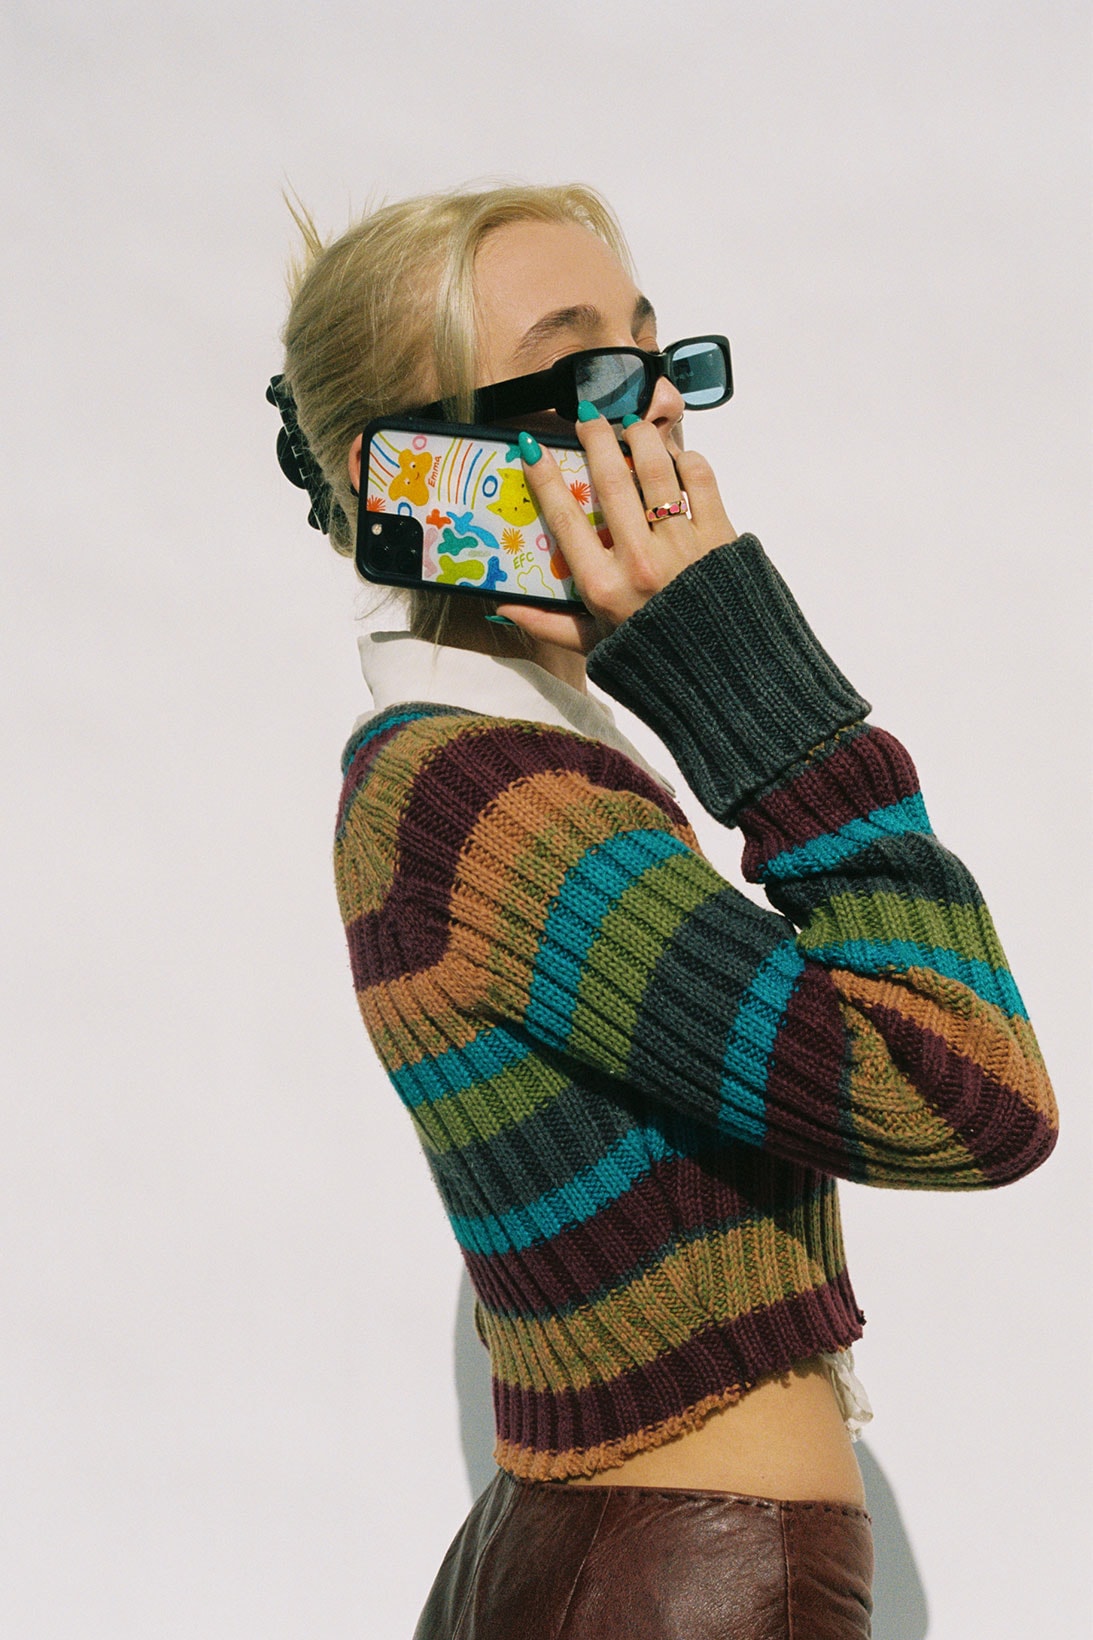 emma chamberlain wildflower iphone cases collaboration sunglasses knit sweater stripes